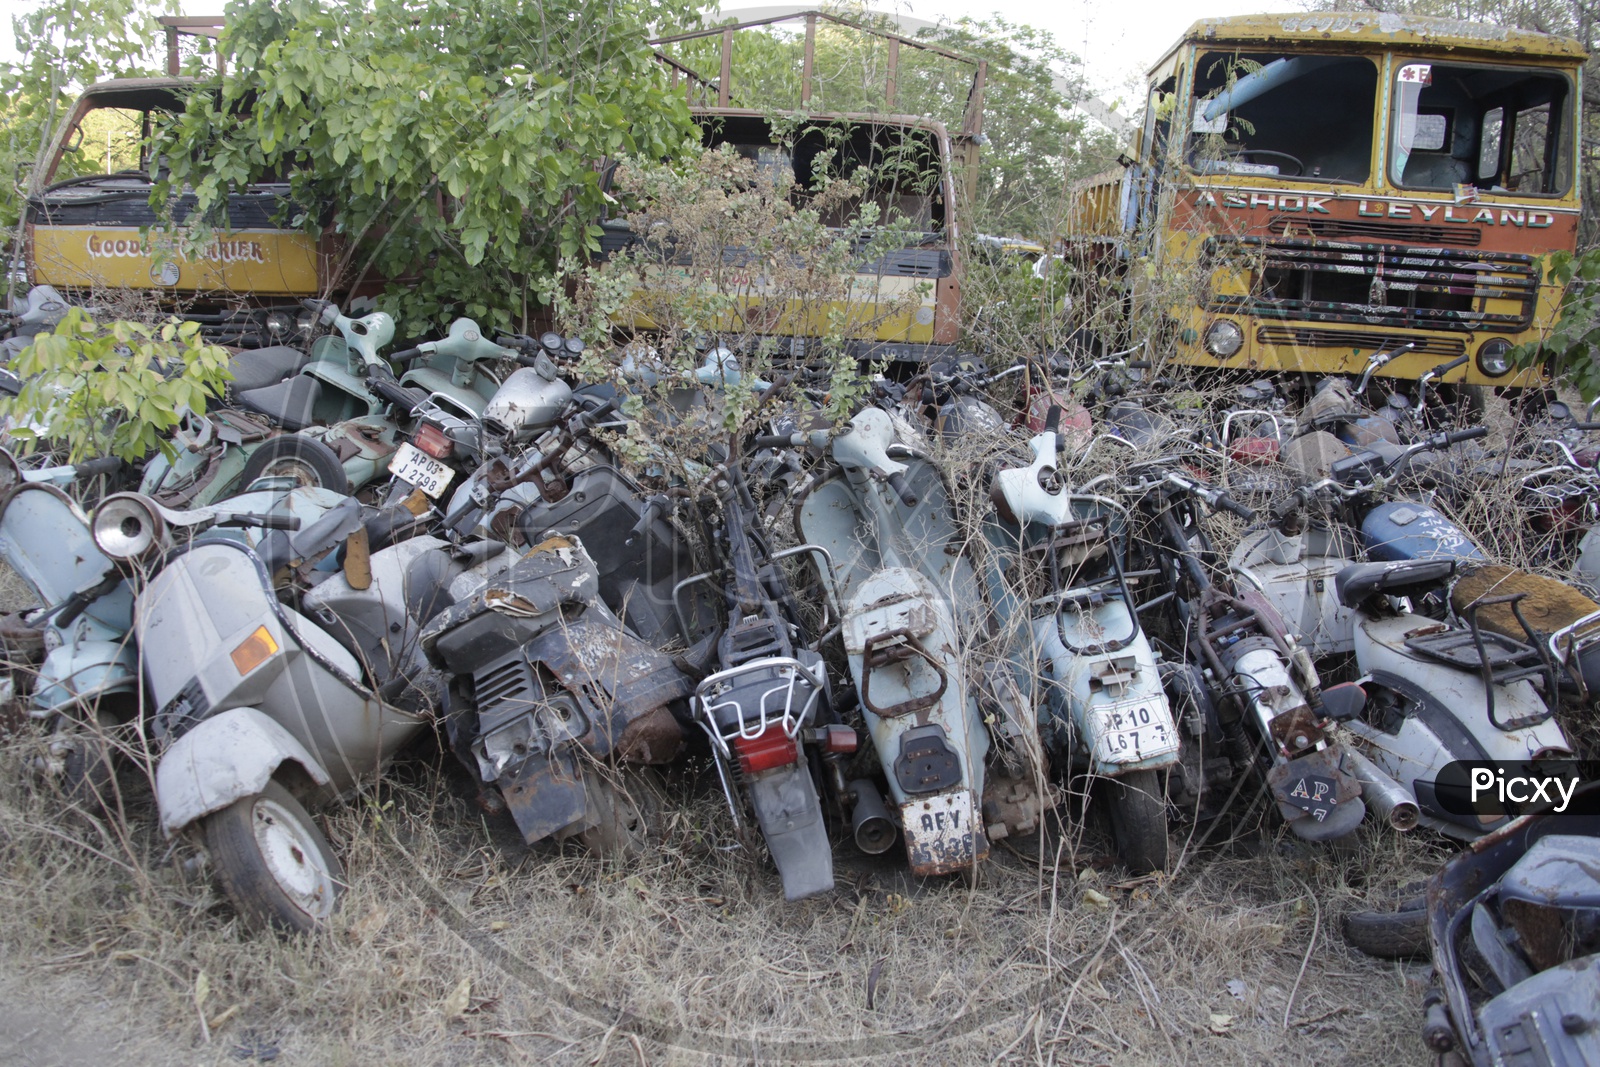 Old Rusted And Wrecked Scooters and lorries